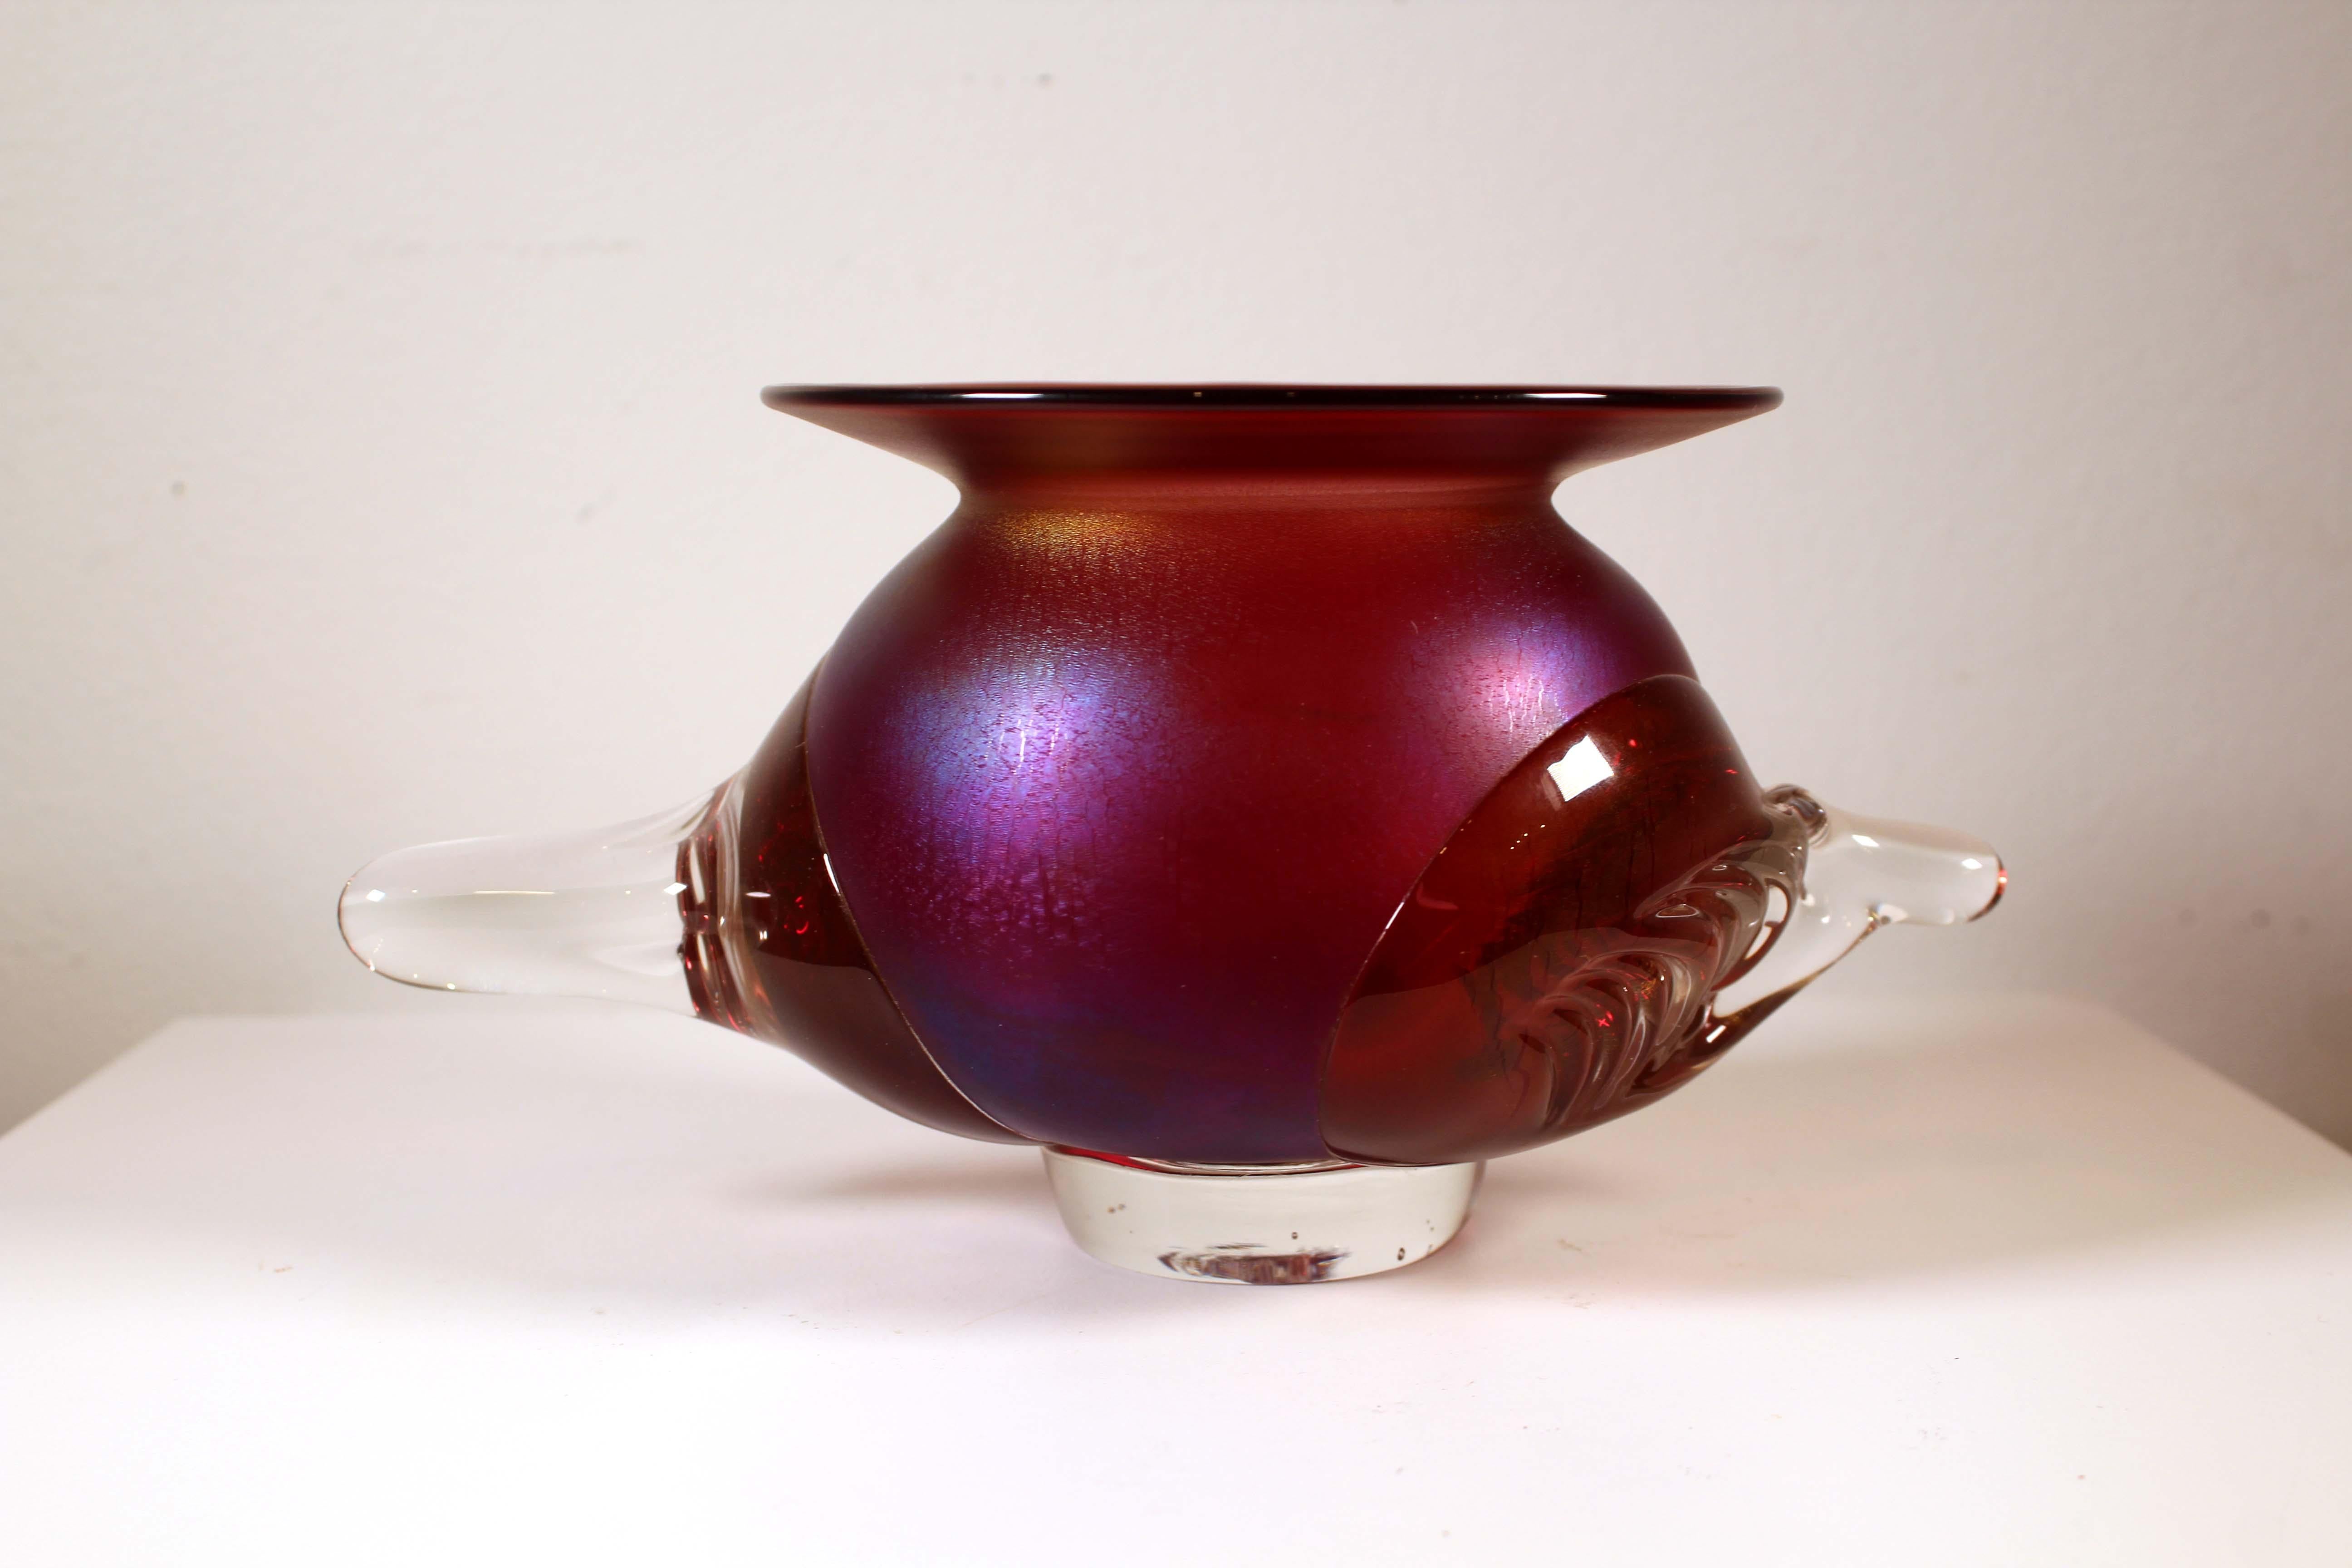 A lovely collection of contemporary iridescent glass vessels, one by American glass artist Charlie Parriott. From a private collection. Dimensions: 7.5” height x 2” diameter / 4.5” height x 8.5” width x 5” diameter / 3” height x 4.5” diameter / 1”